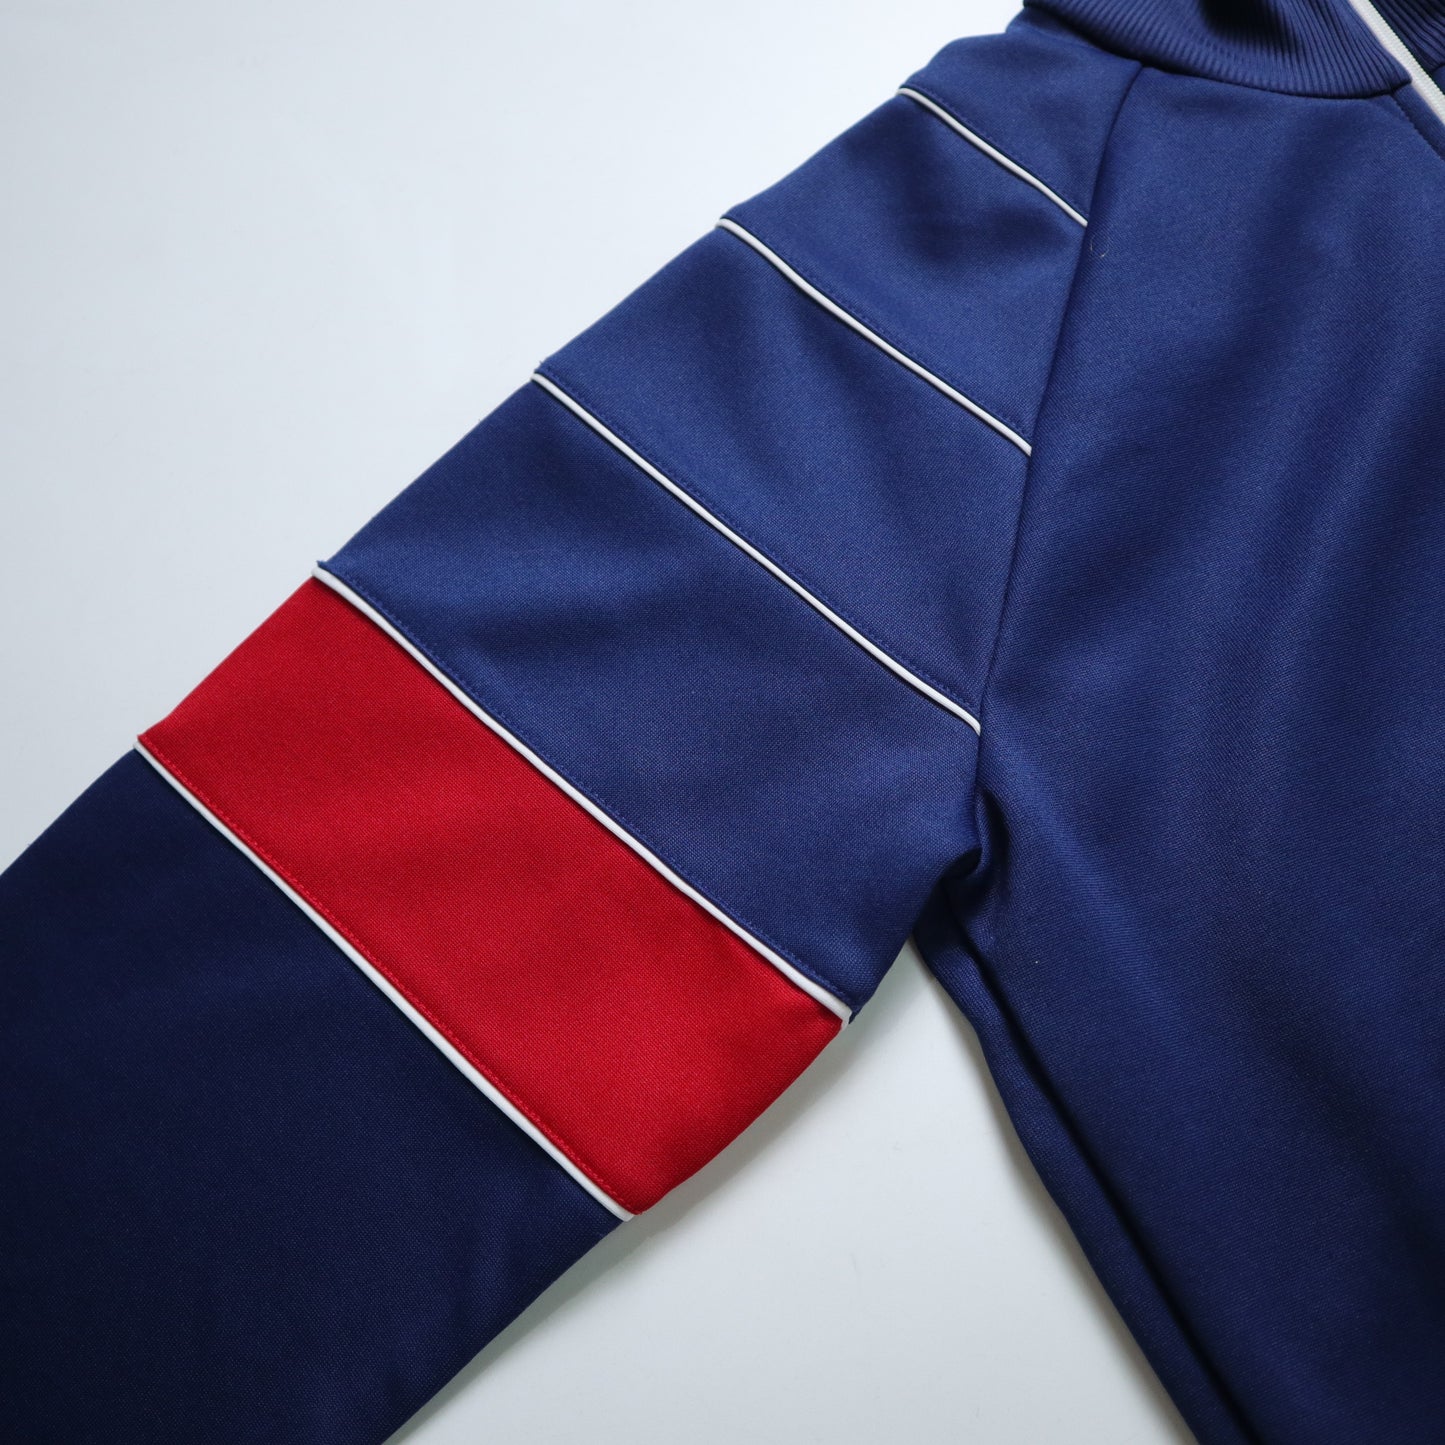 1980s Adidas navy blue sports jacket made in Taiwan